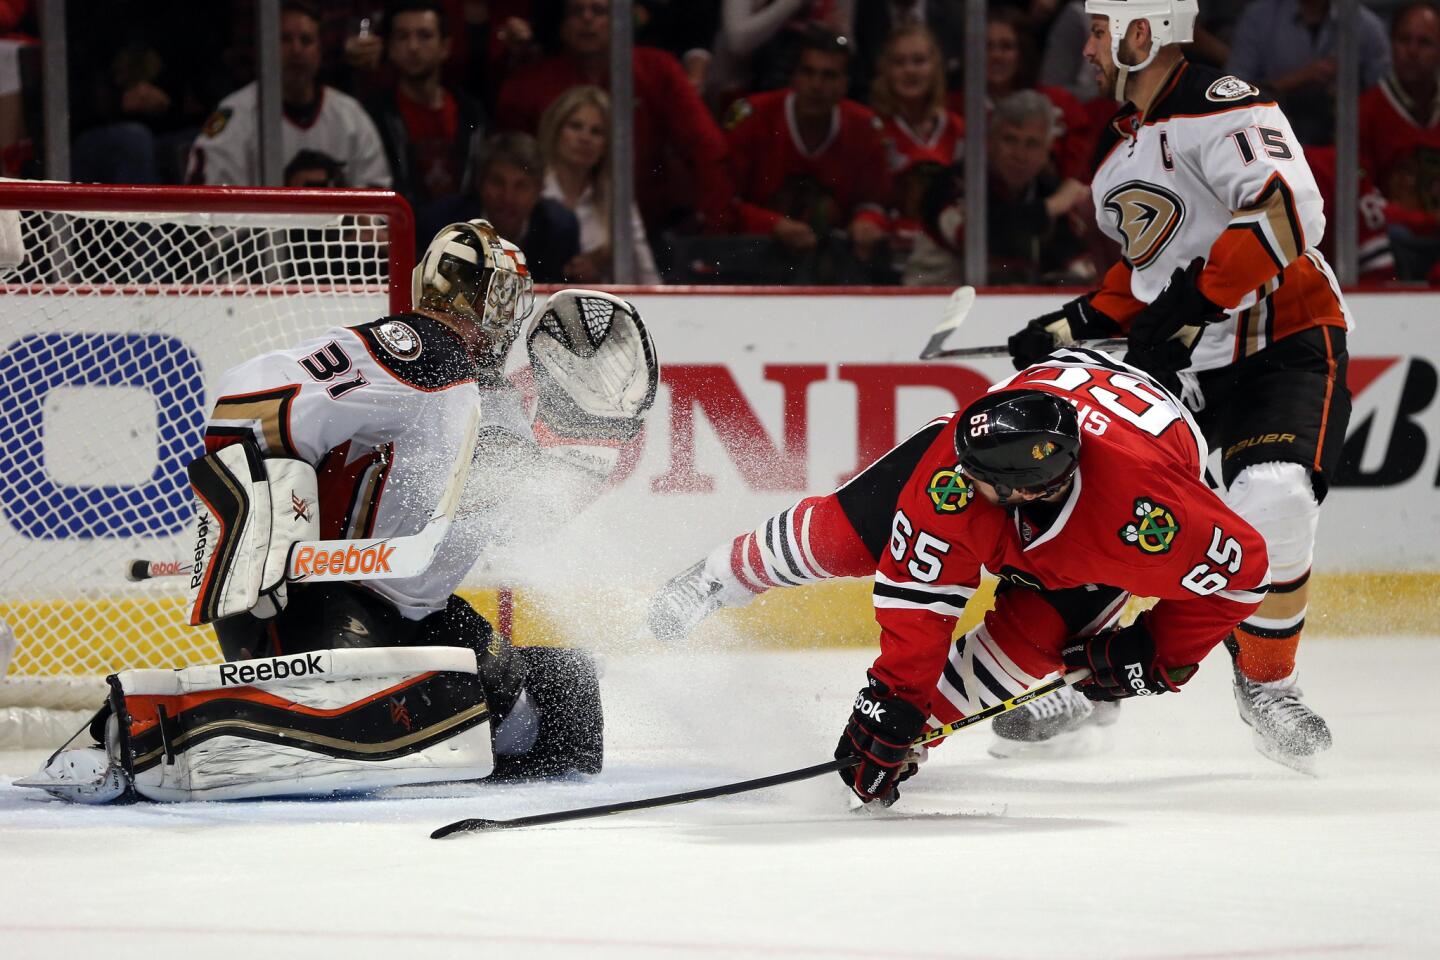 Blackhawks right wing Andrew Shaw watches his shot beat Ducks goaltender Frederik Andersen in the third period of Game 6 on Wednesday night in Chicago.